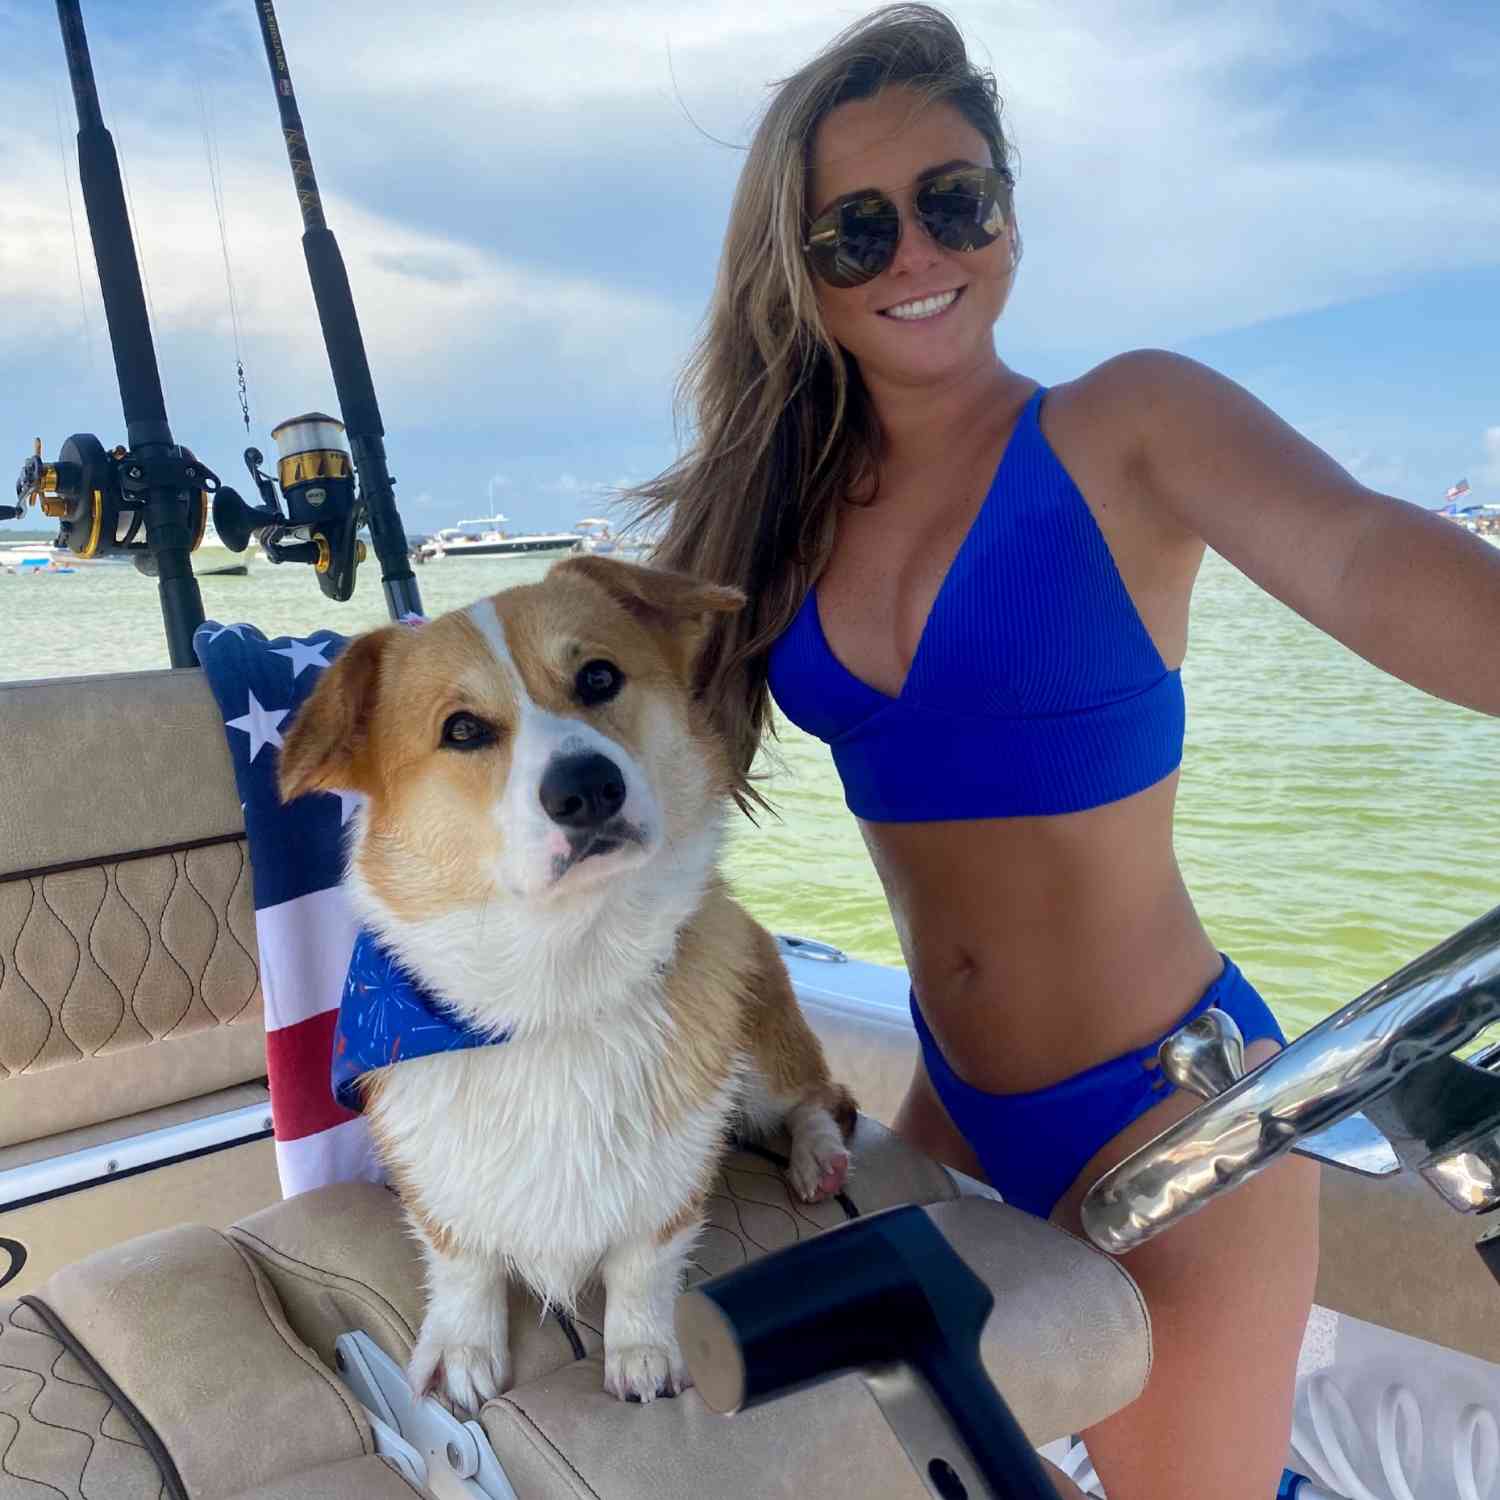 Title: 4th of July on the new Sportsman - On board their Sportsman Open 212 Center Console - Location: Orange Beach, AL. Participating in the Photo Contest #SportsmanJuly2020